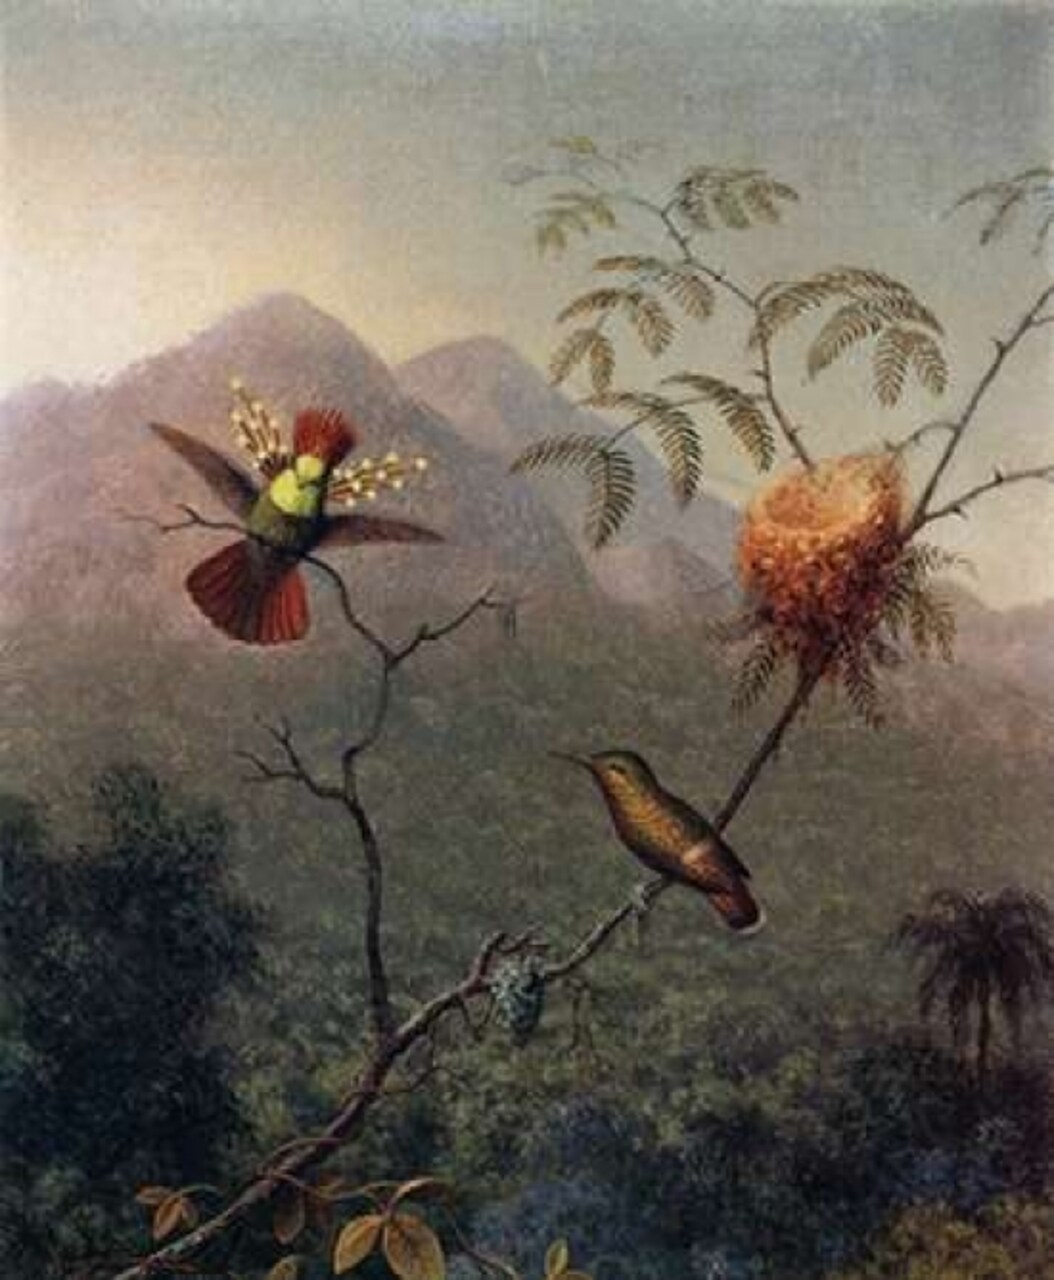 Tufted Coquette Poster Print by  Martin Johnson Heade - Item # VARPDX375815